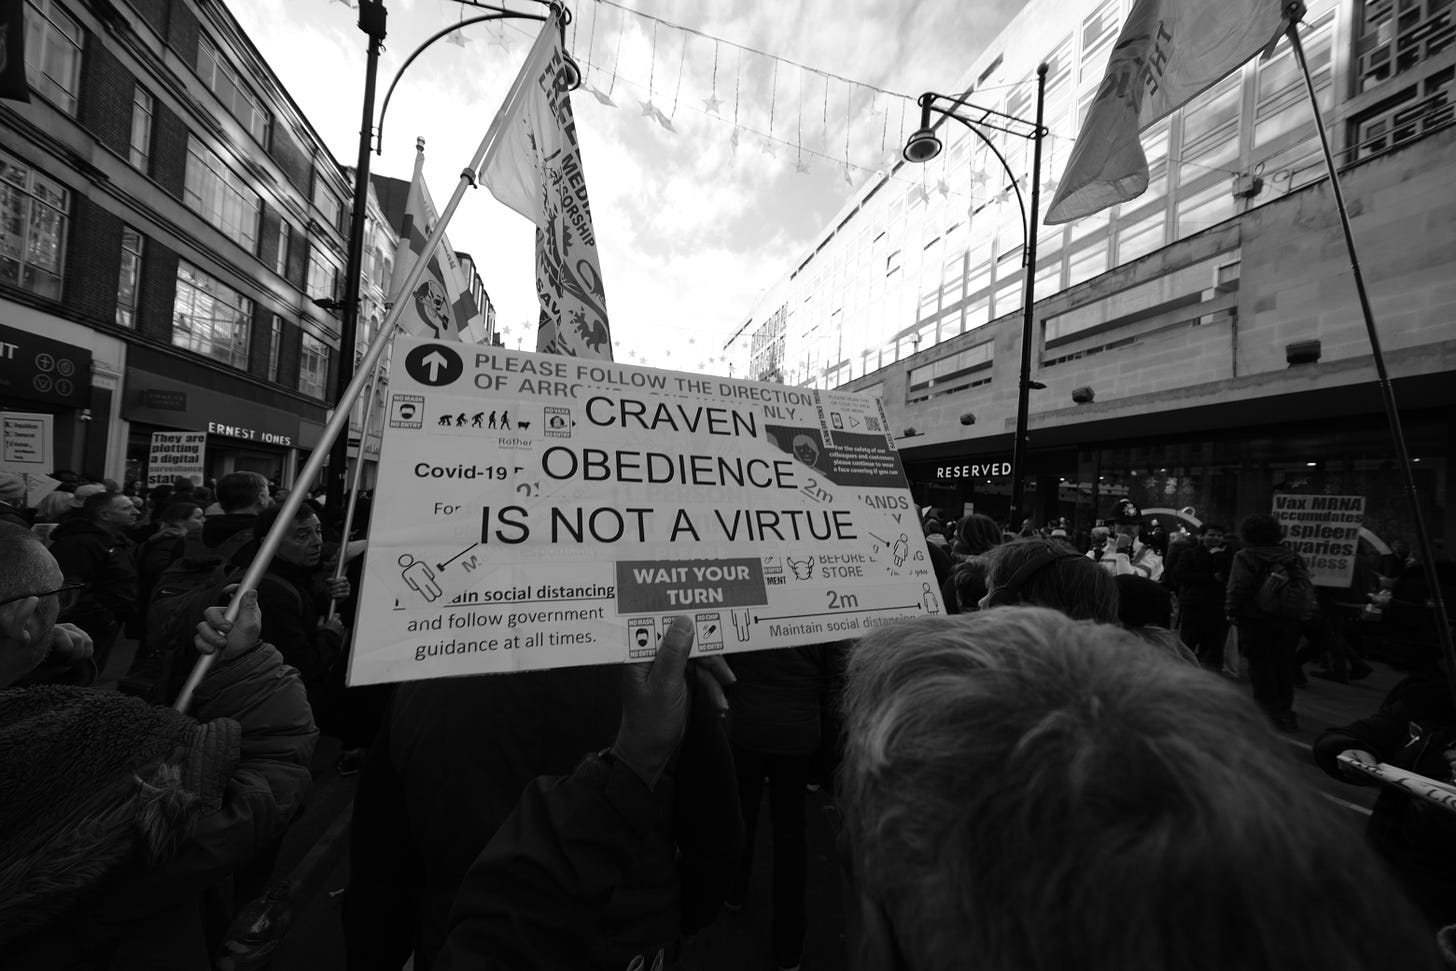 Obedience is not a virtue